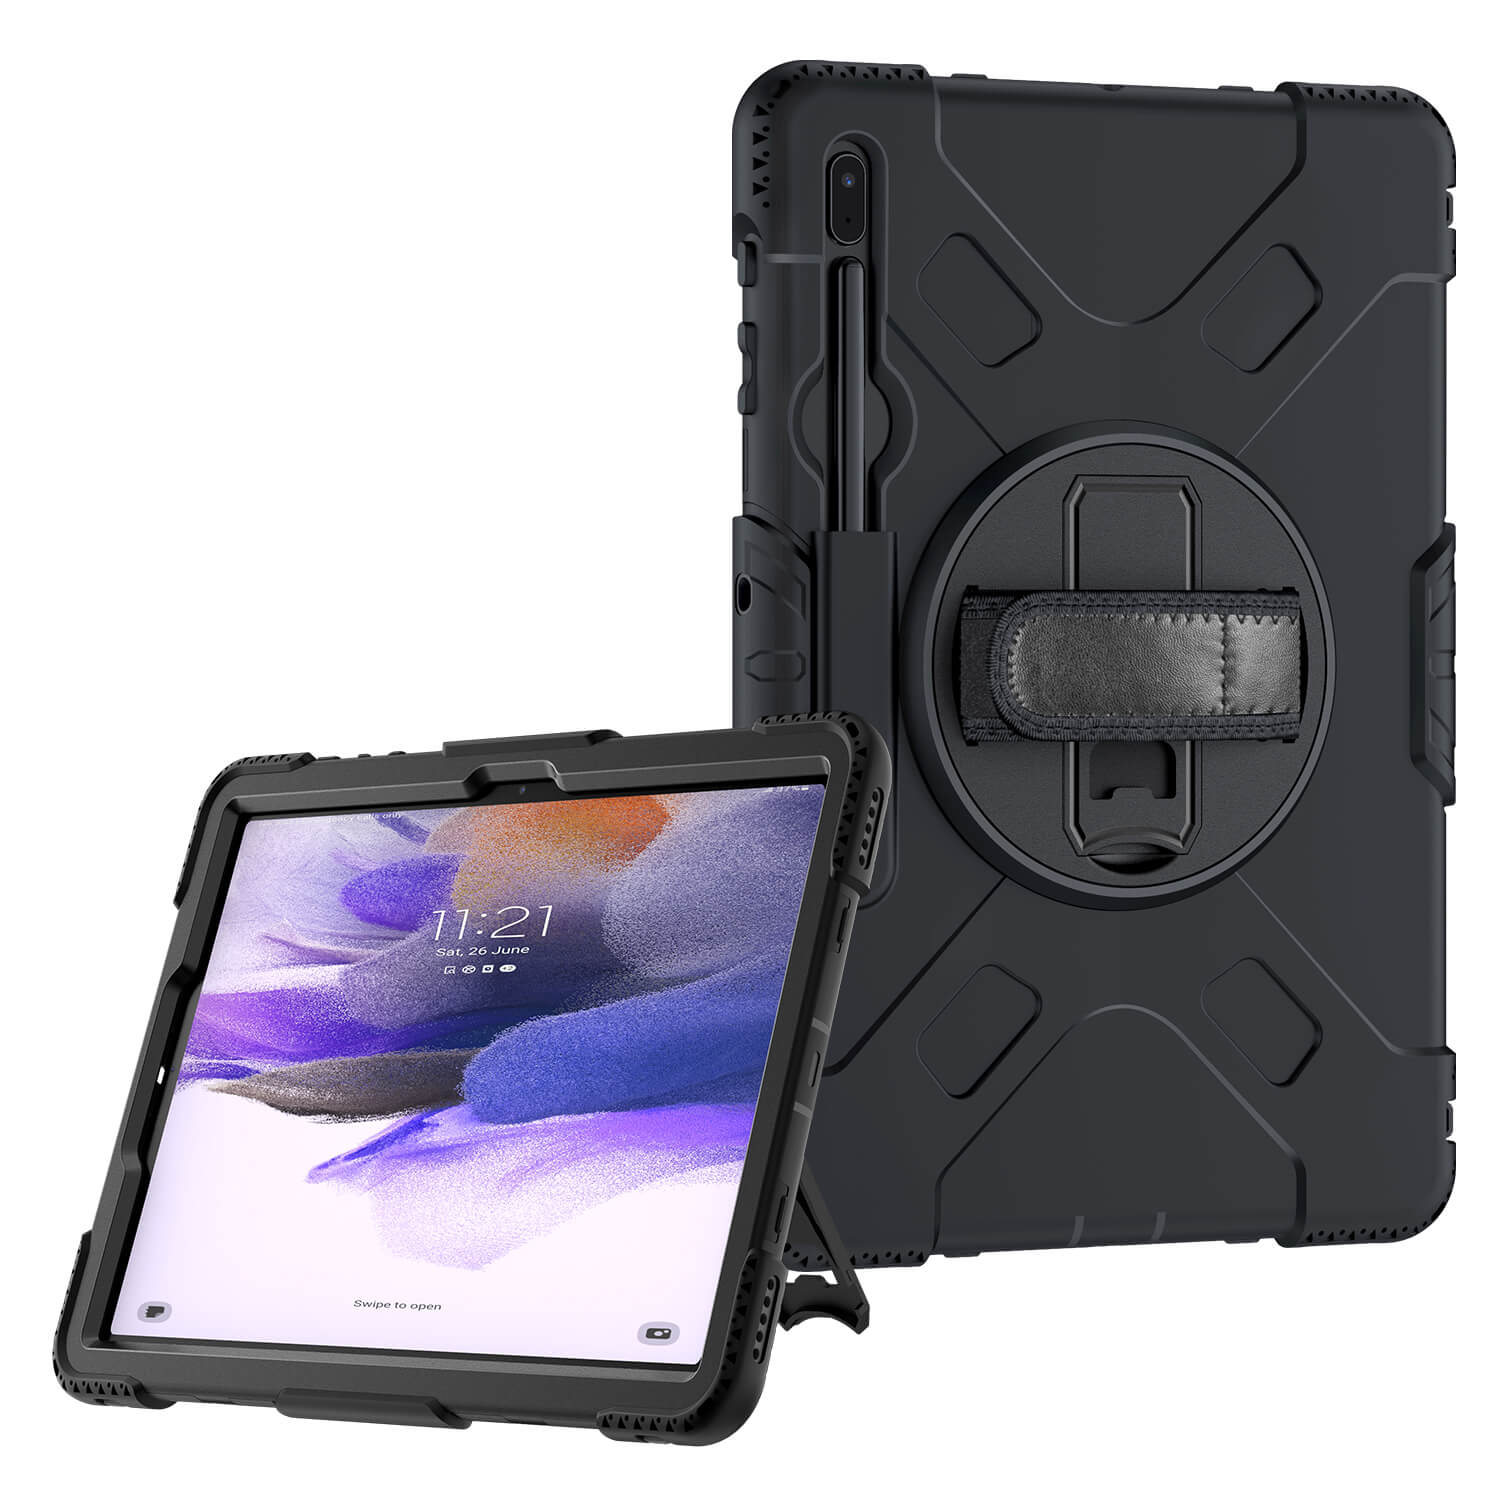 Tough on Samsung Galaxy Tab S7 FE Case Rugged Protection Black